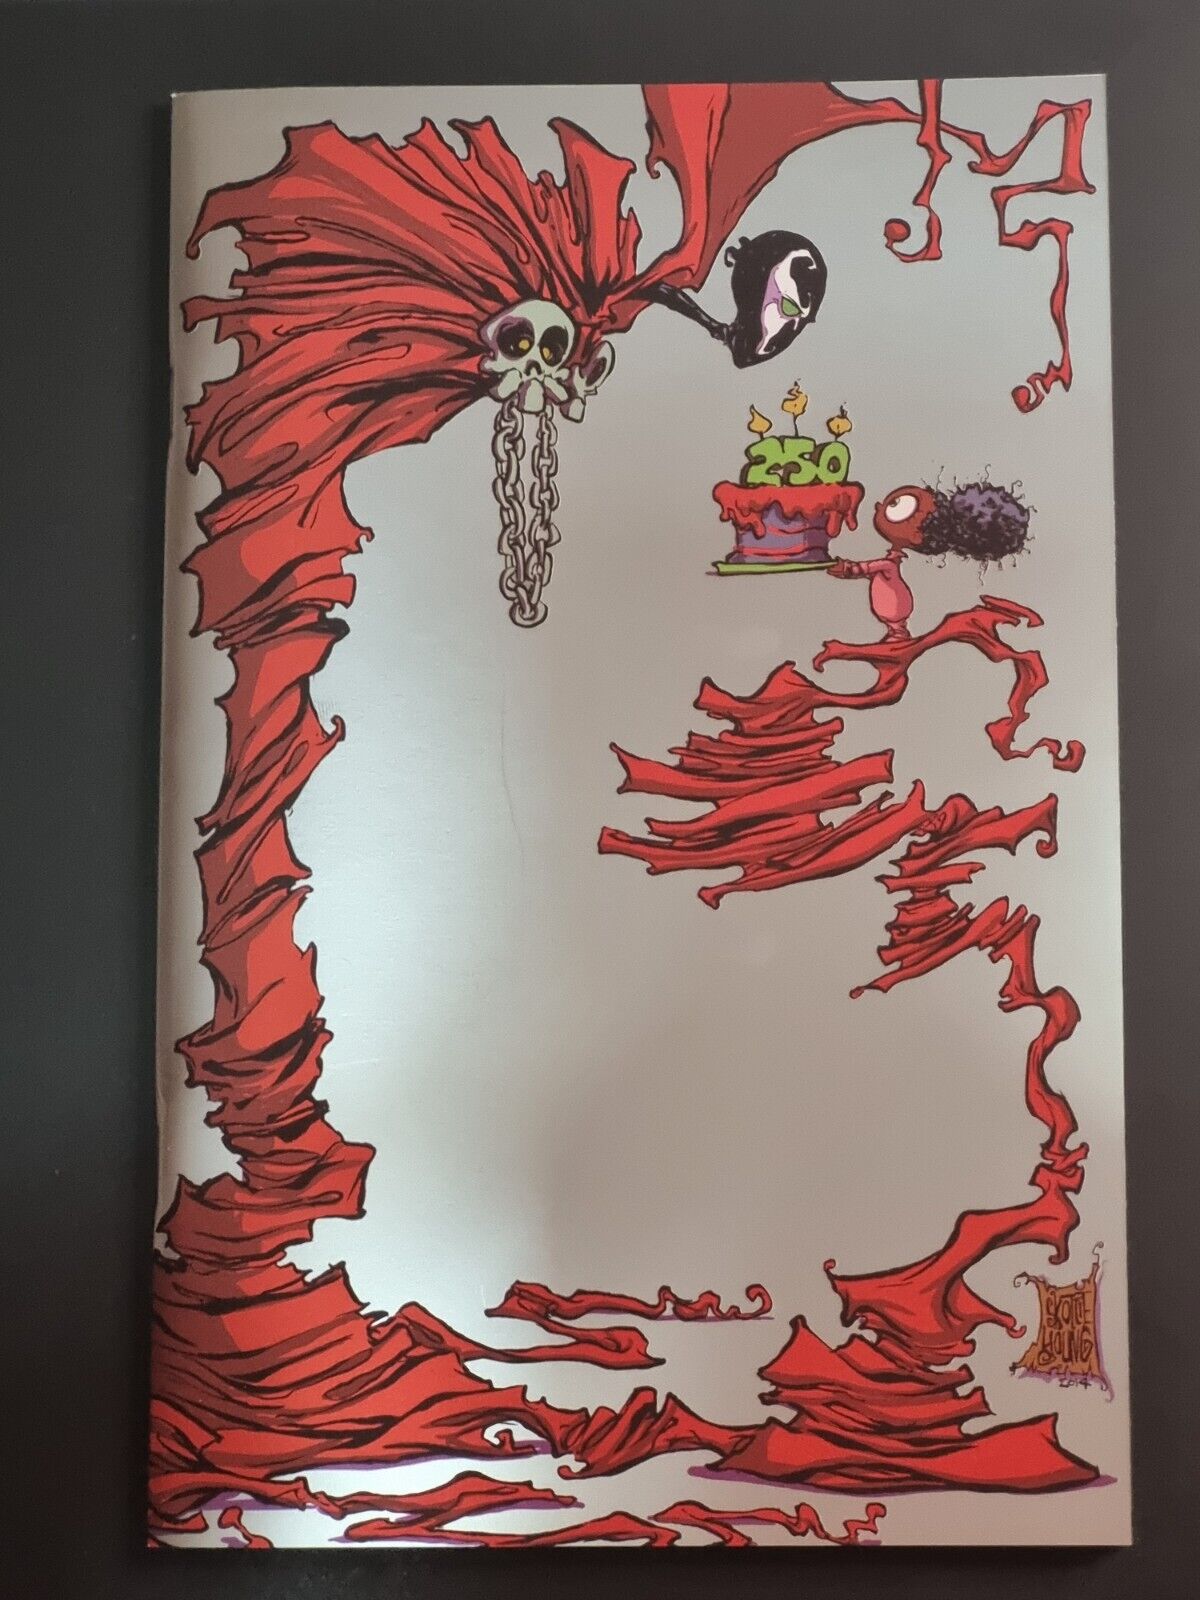 Spawn #250 - Skottie Young Variant Mexican Foil Edition - NM-